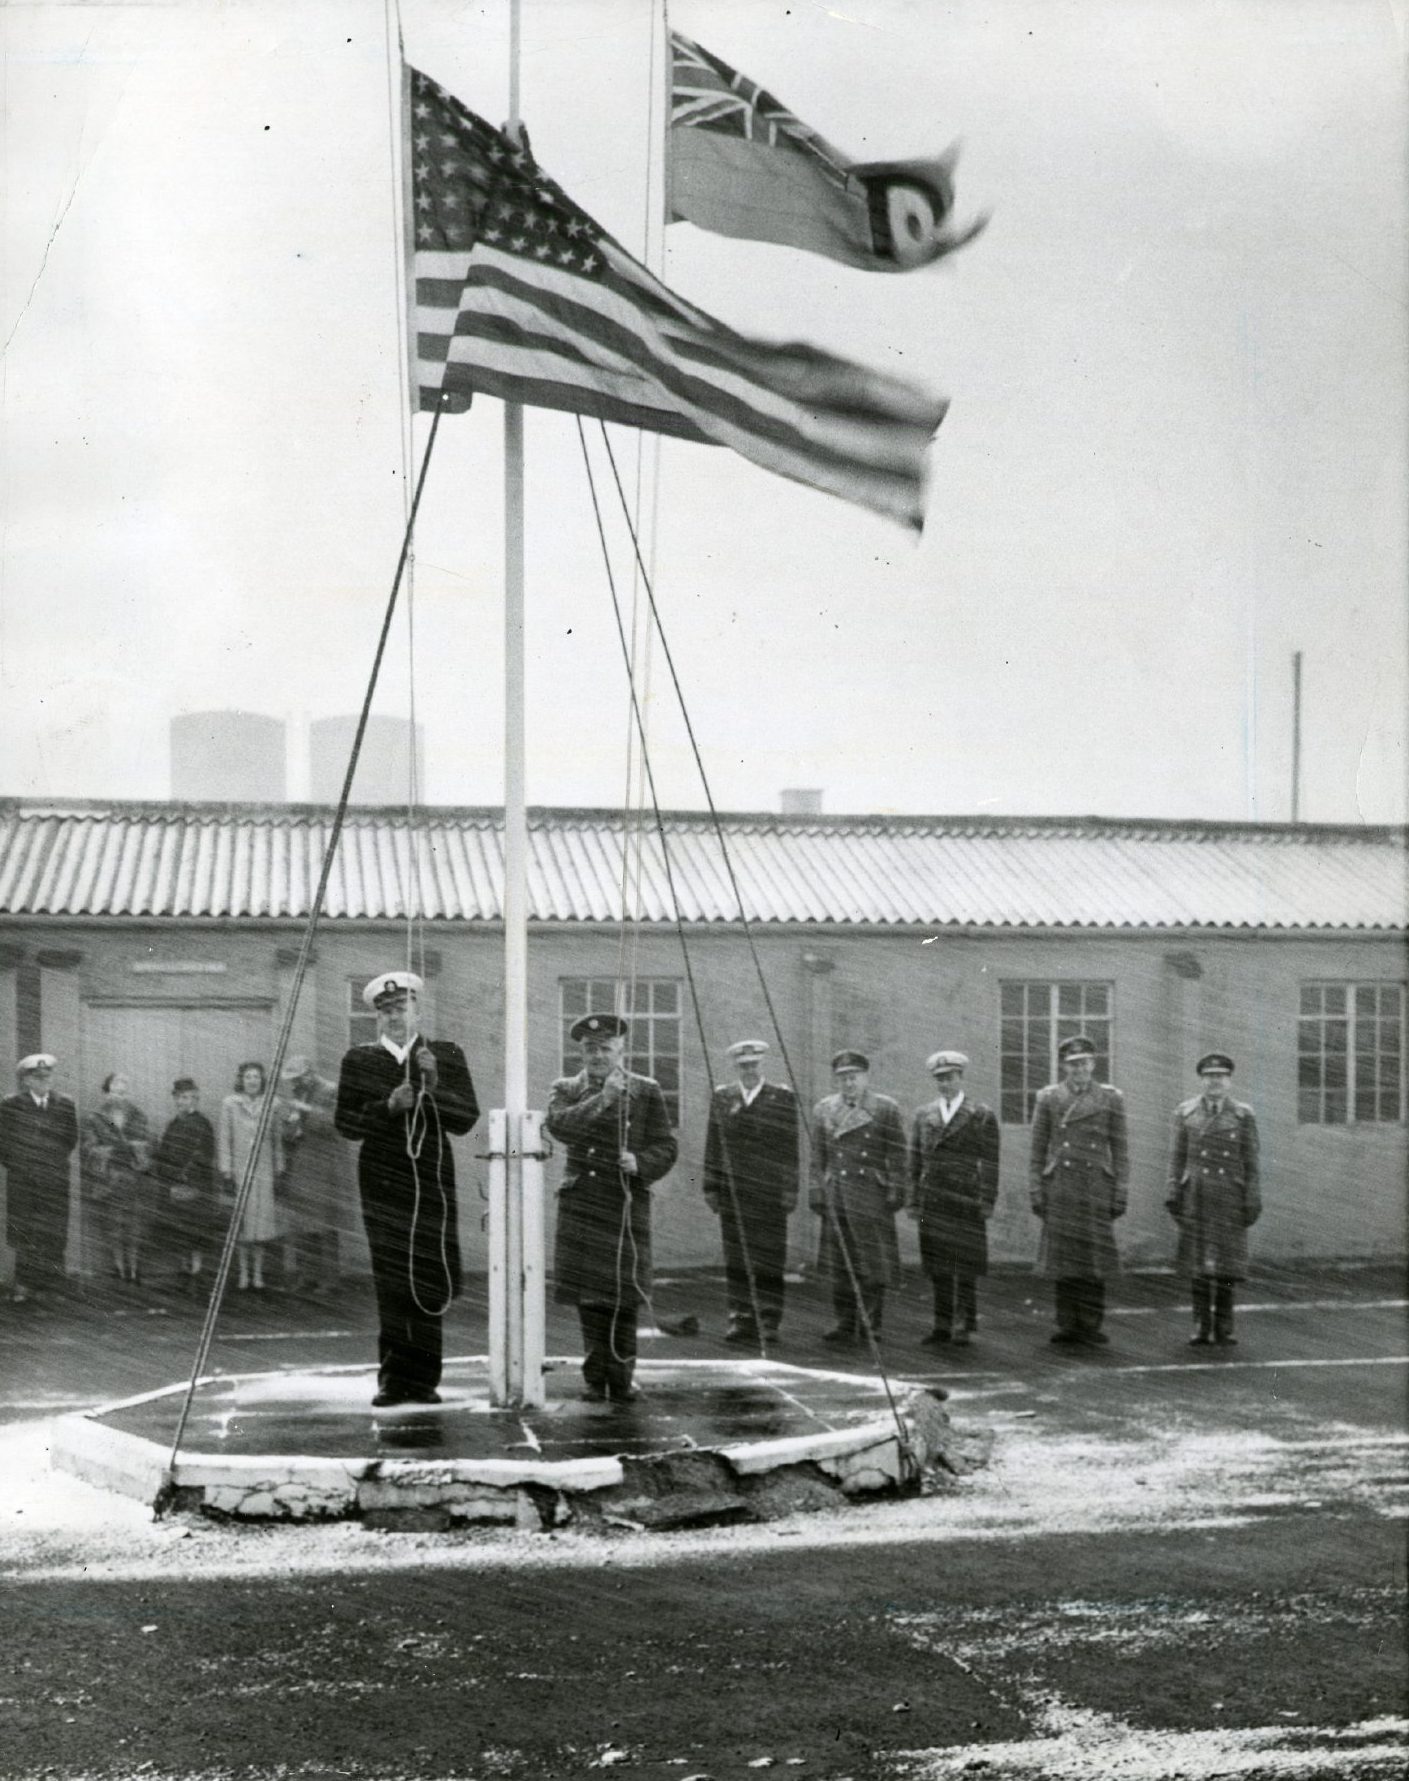 Raising of the flags at the opening of the RAF base in Edzell in 1960 during a snowstorm. 